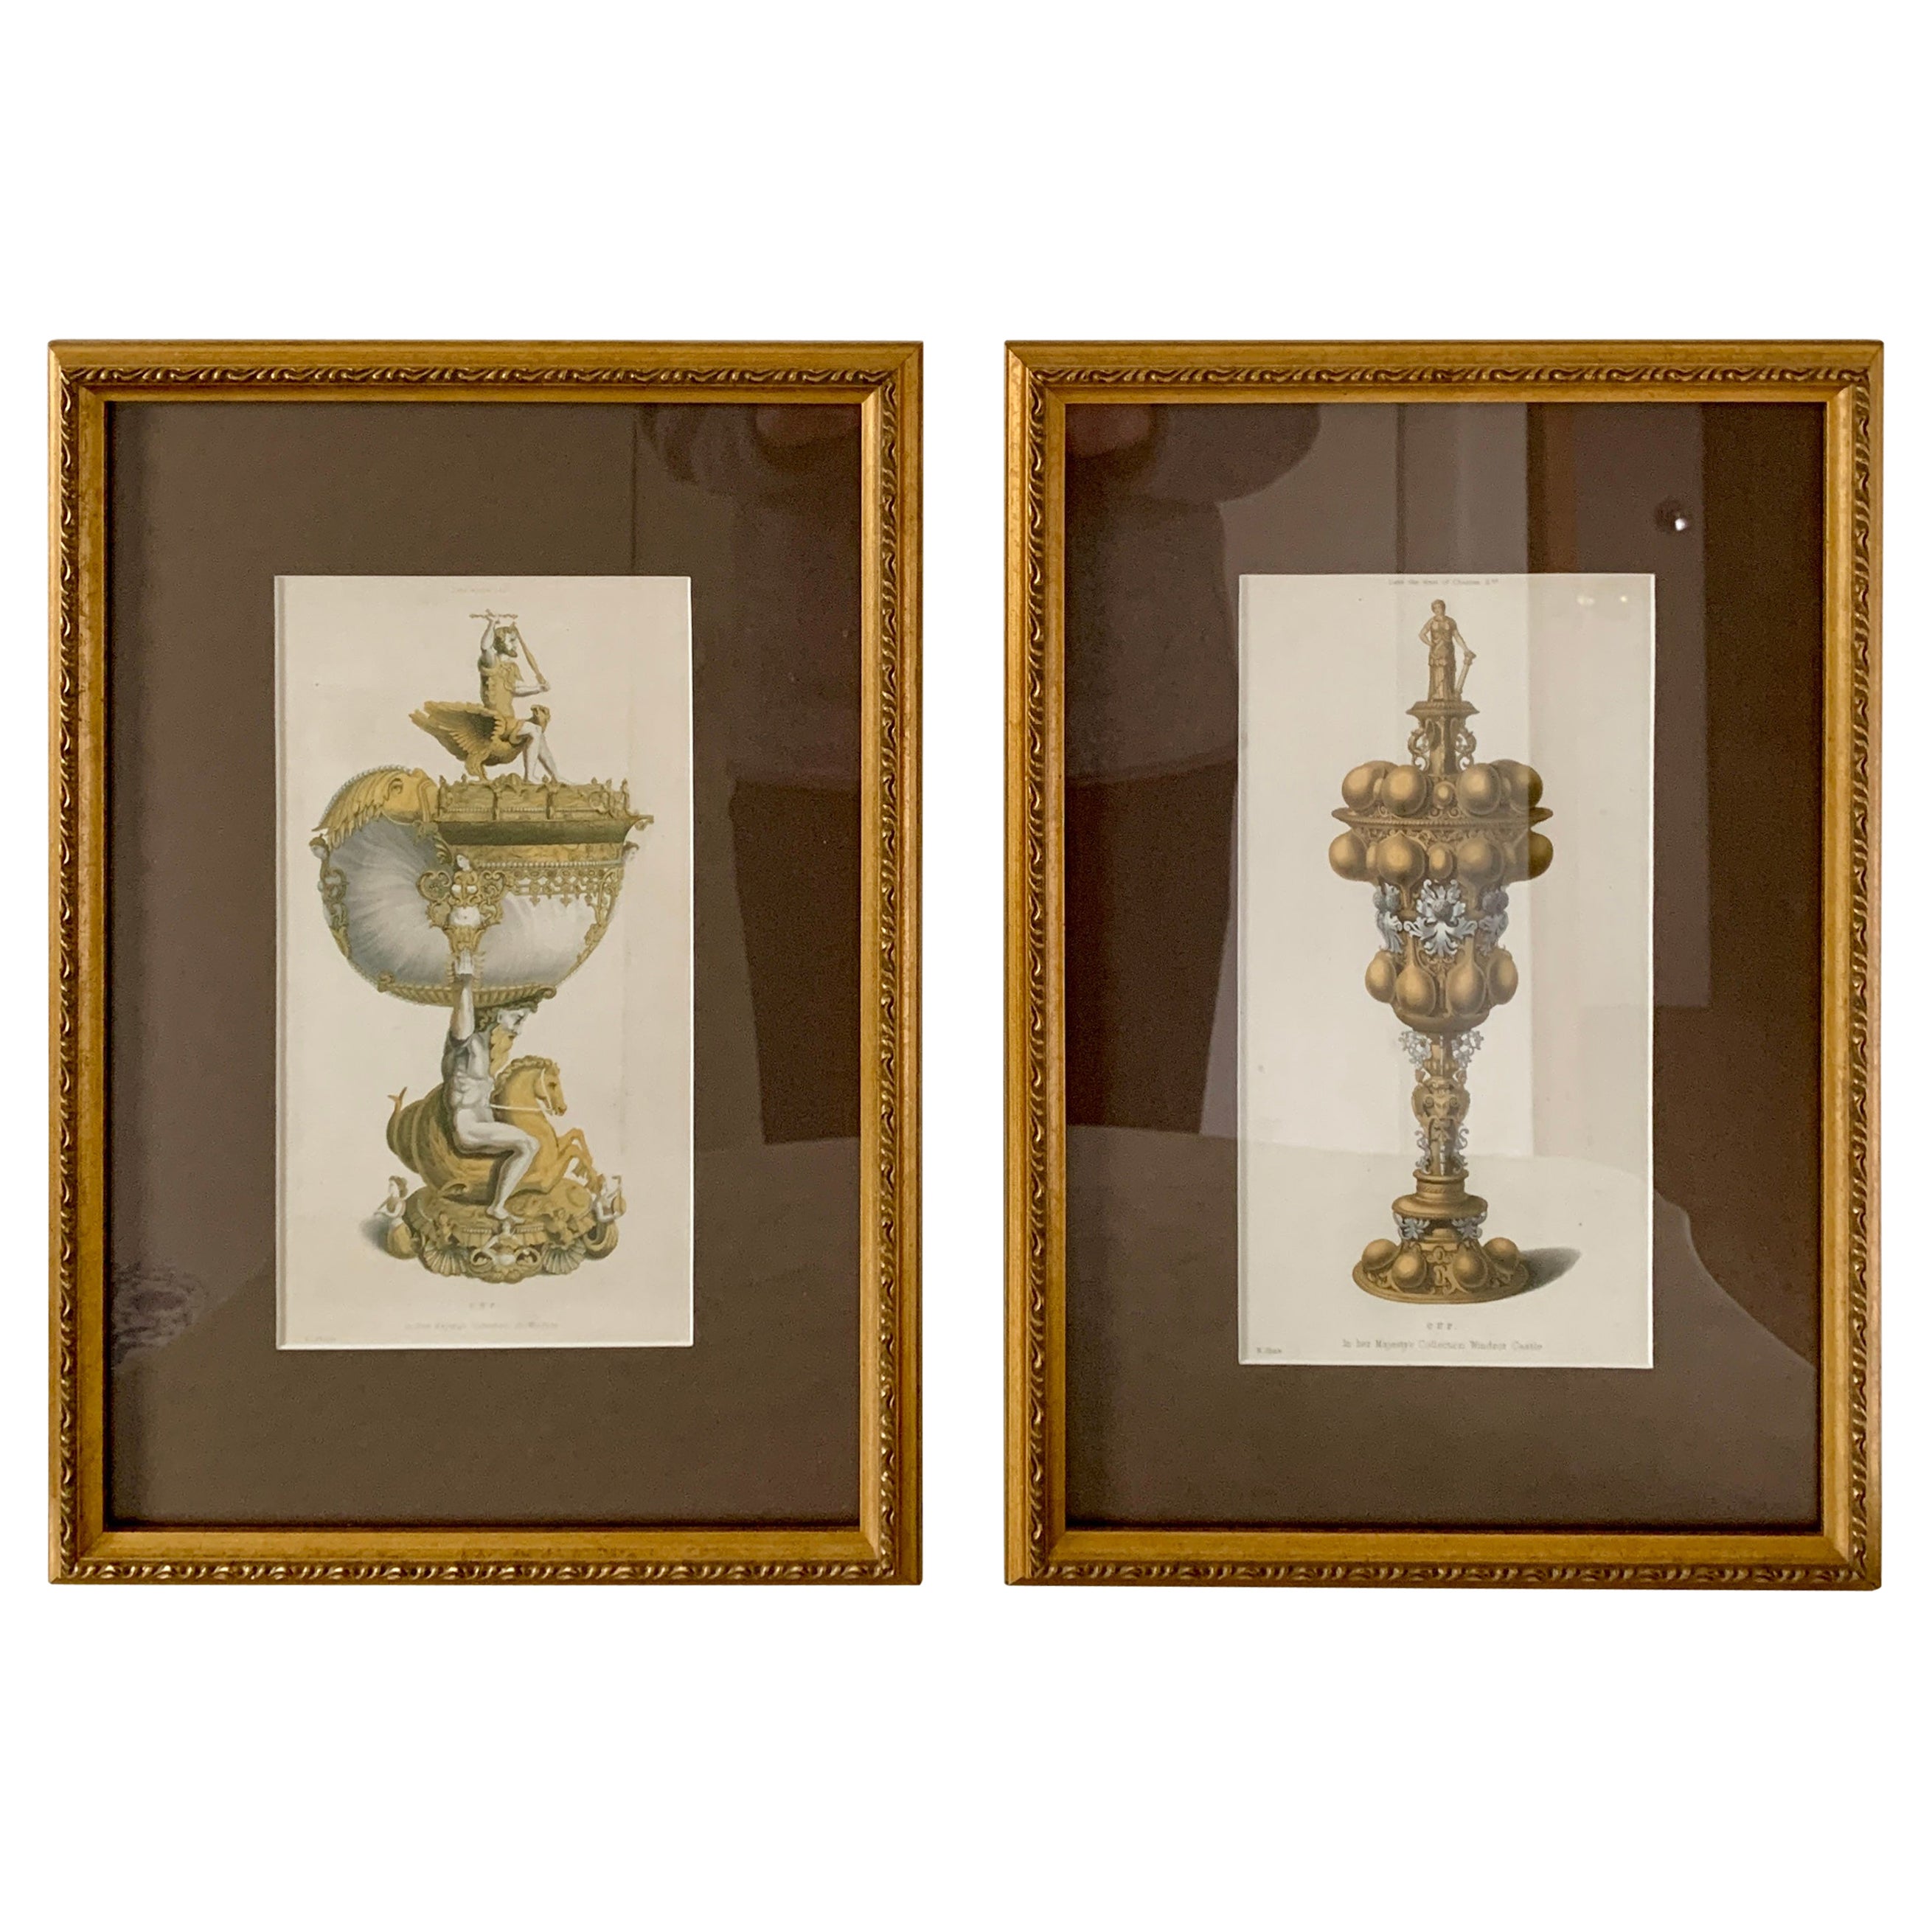 Framed Prints of Pieces in Her Majesty's Collection at Windsor by H. Shaw, Pair